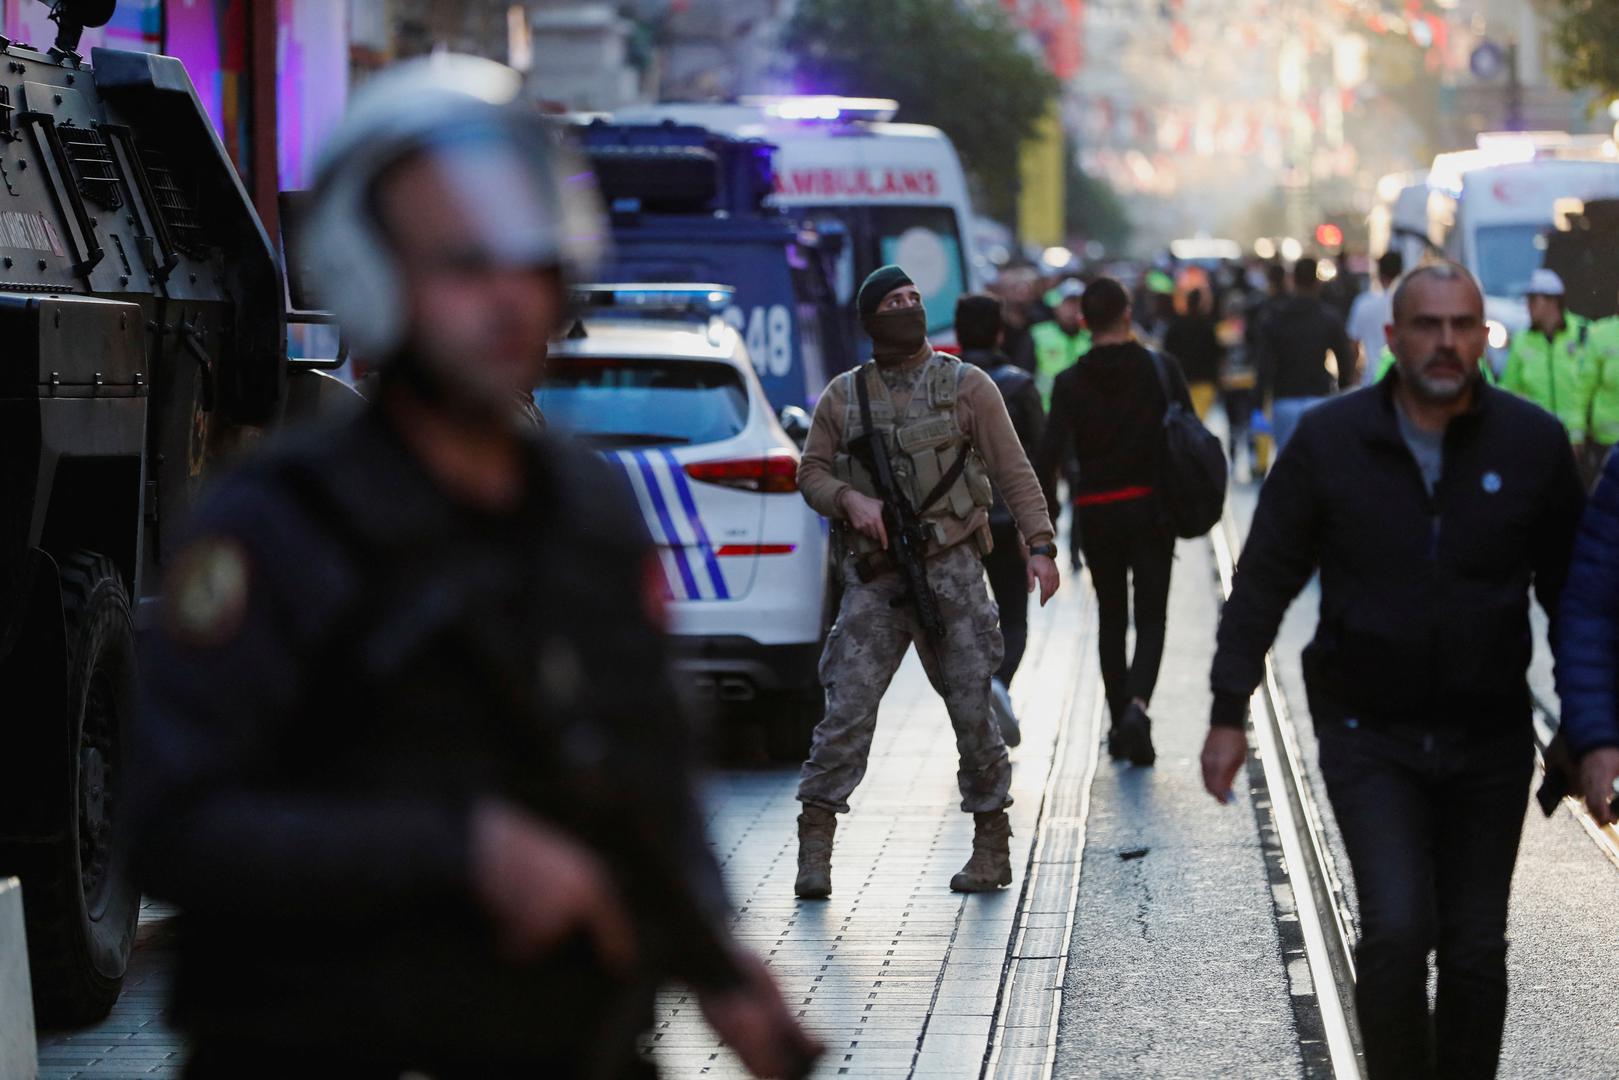 A member of the security forces stands near the scene after an explosion on busy pedestrian Istiklal street in Istanbul, Turkey, November 13, 2022. REUTERS/Kemal Aslan Photo: KEMAL ASLAN/REUTERS